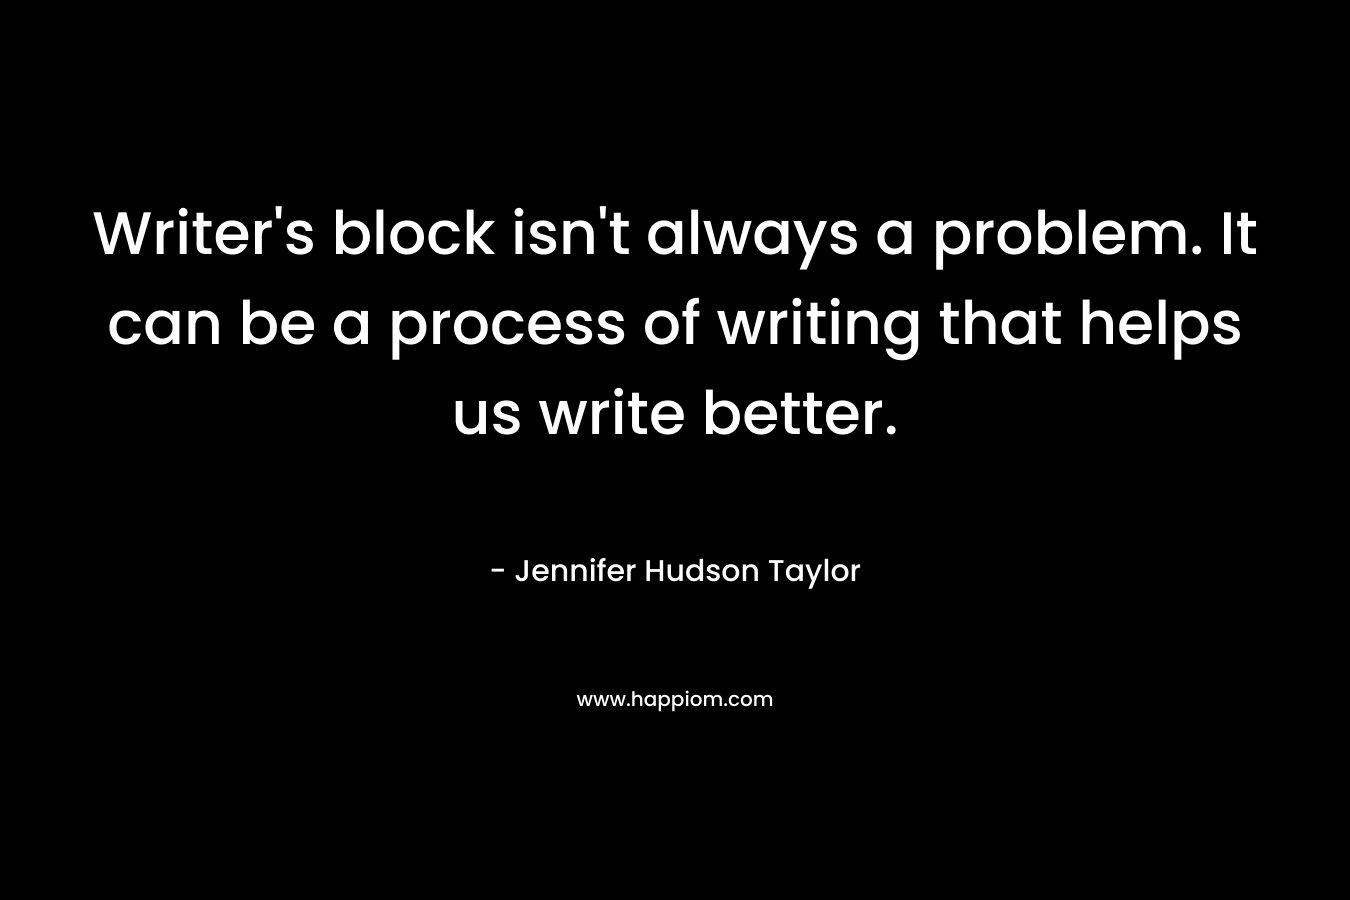 Writer’s block isn’t always a problem. It can be a process of writing that helps us write better. – Jennifer Hudson Taylor